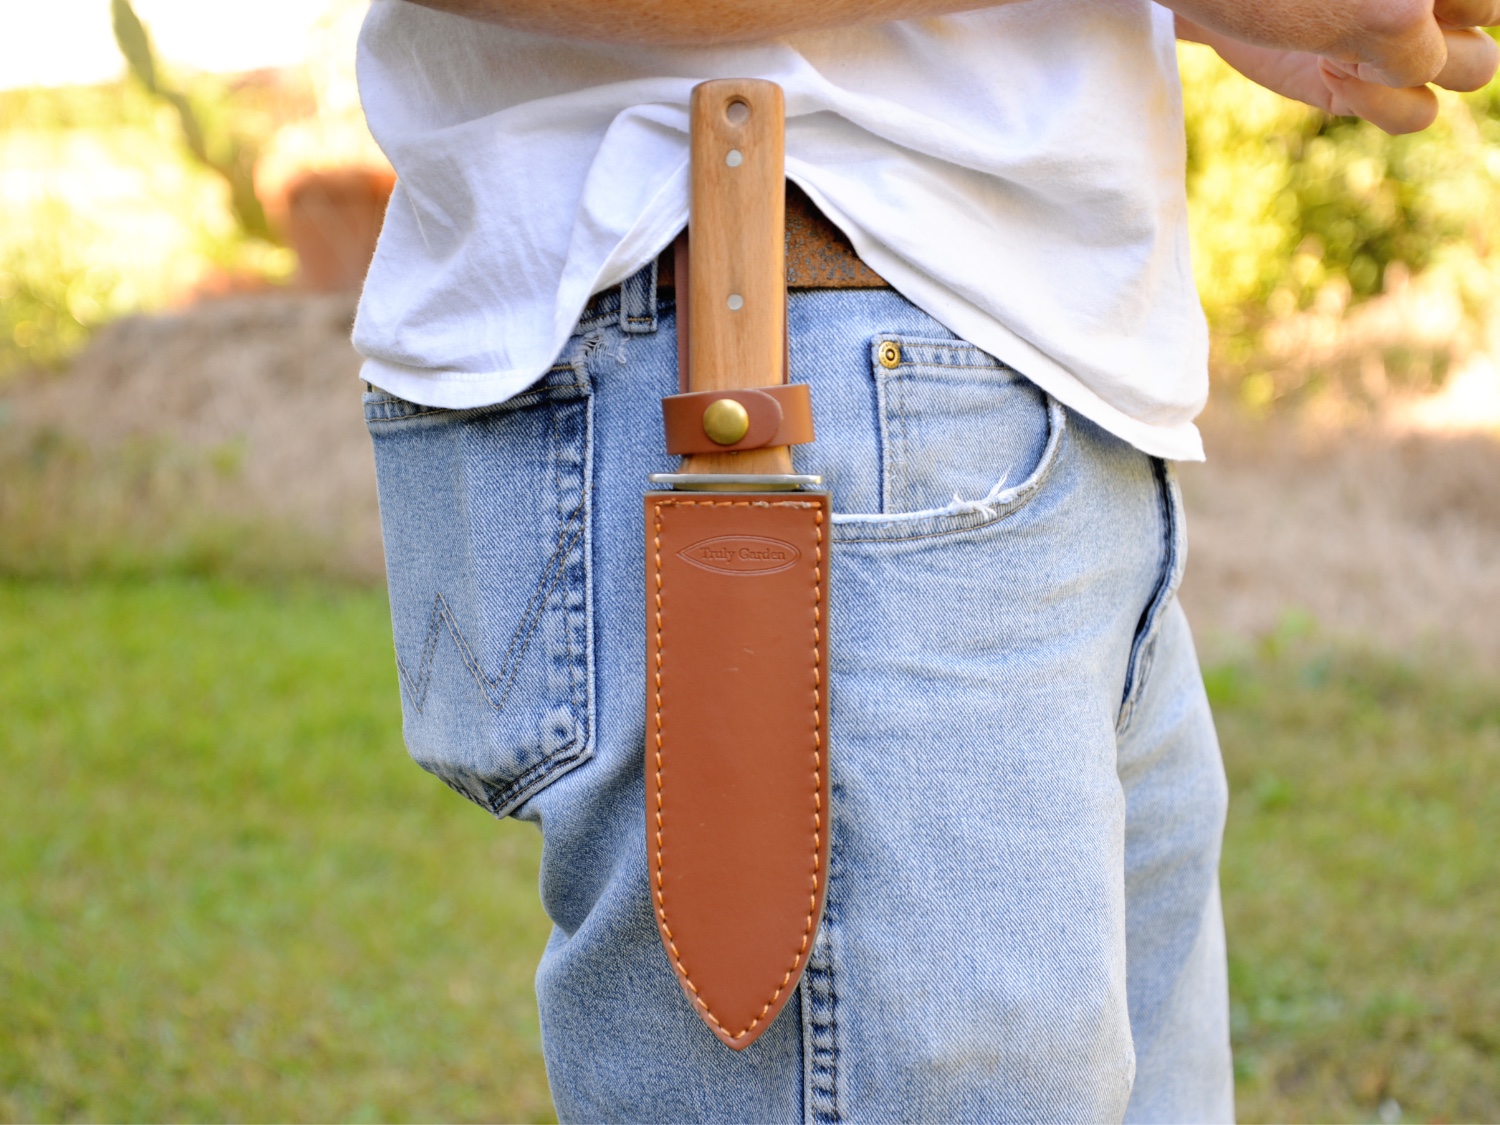 A person wearing the Truly Garden hori hori knife in its sheath on their hip.